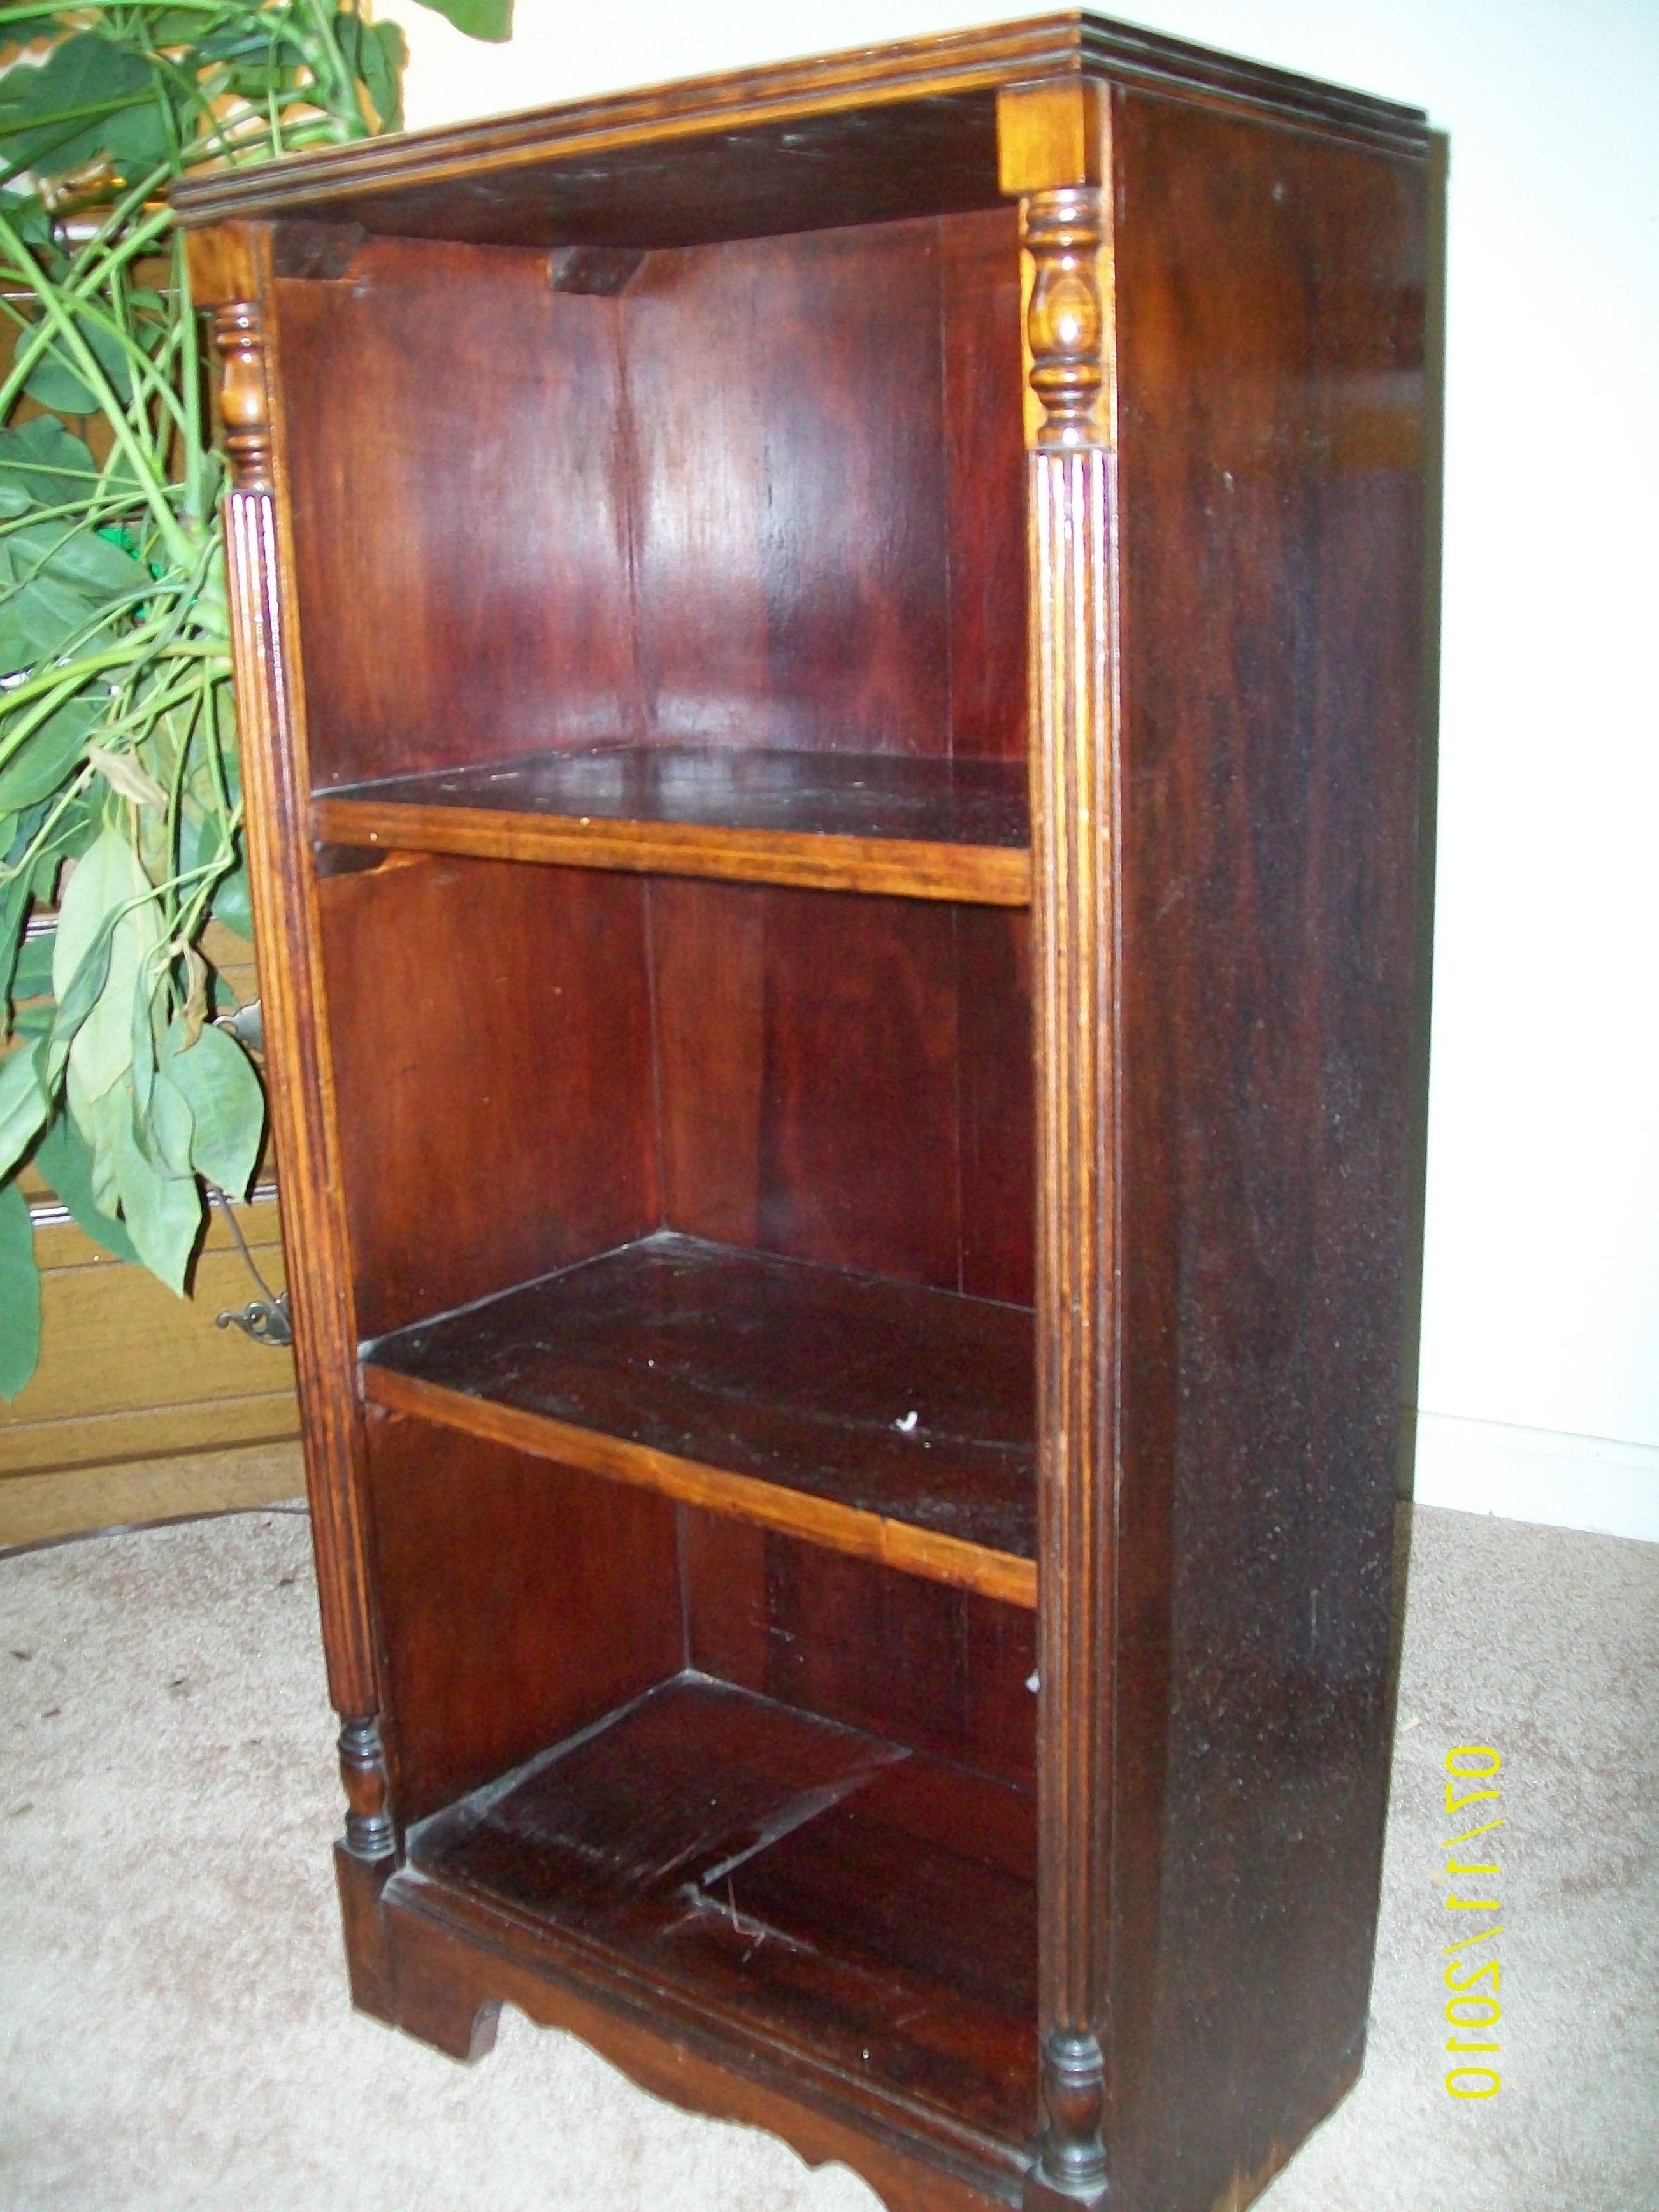 Hungerford Furniture Regarding Most Popular Hungerford Mahogany Full Size 4 Piece Set For Sale (View 9 of 15)